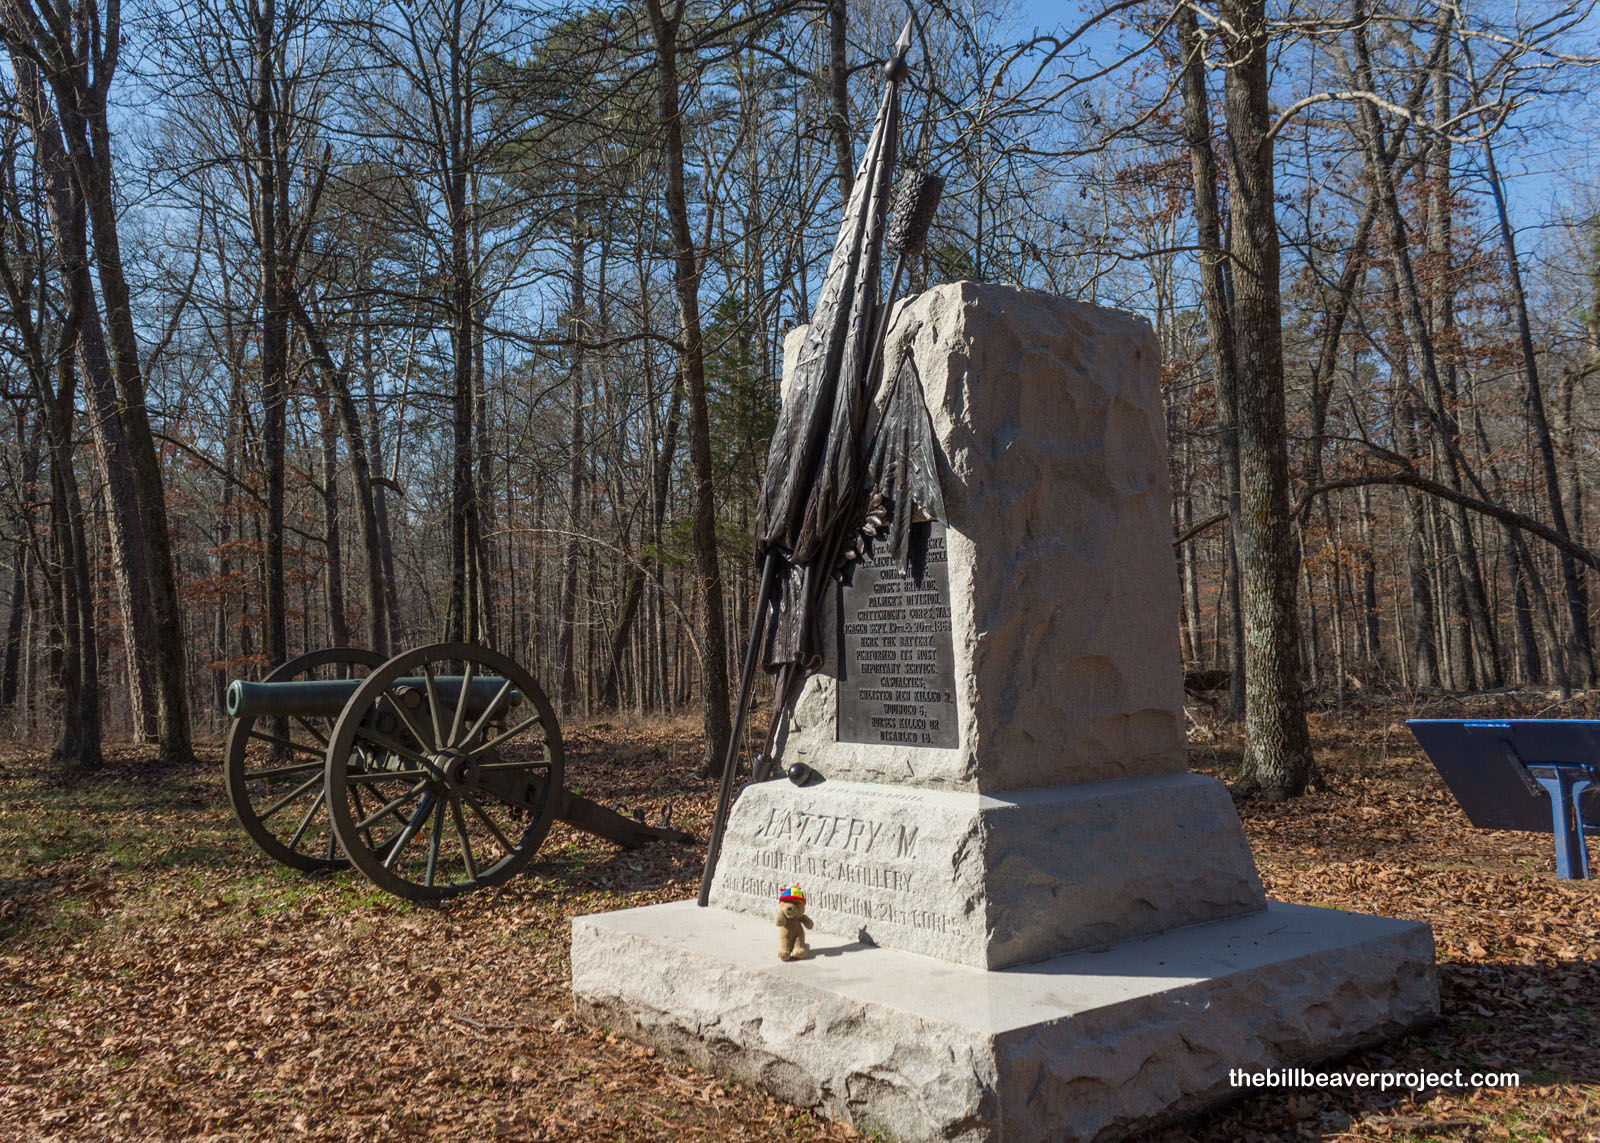 A monument to Battery M of the Fourth U.S. Artillery!